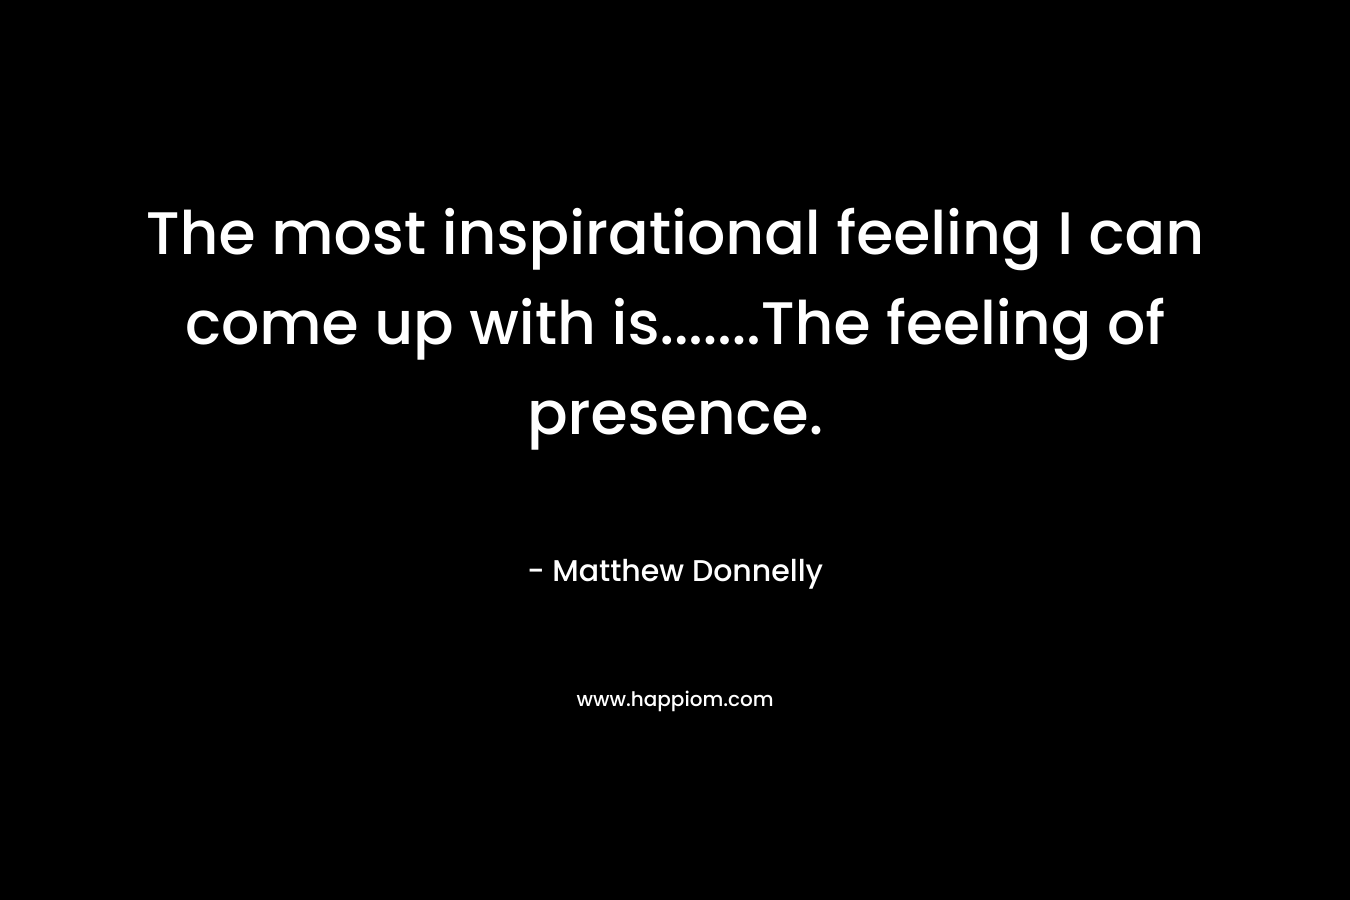 The most inspirational feeling I can come up with is…….The feeling of presence. – Matthew Donnelly